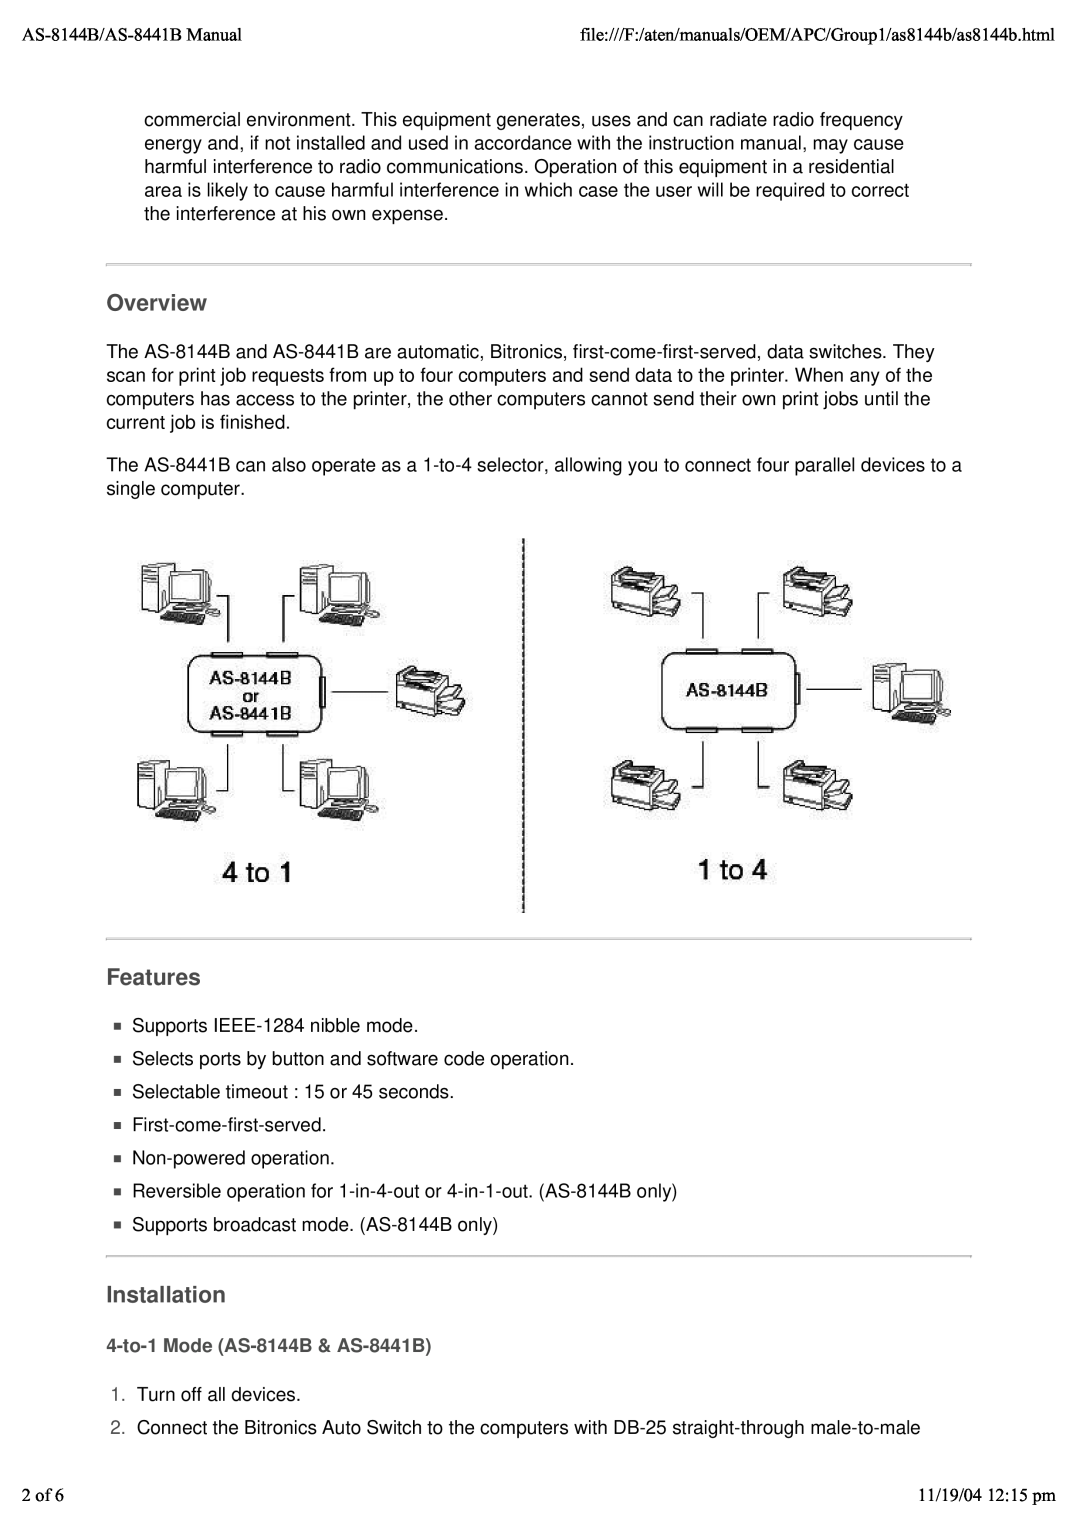 ATEN Technology user manual Overview, Features, Installation, 4-to-1 Mode AS-8144B & AS-8441B 